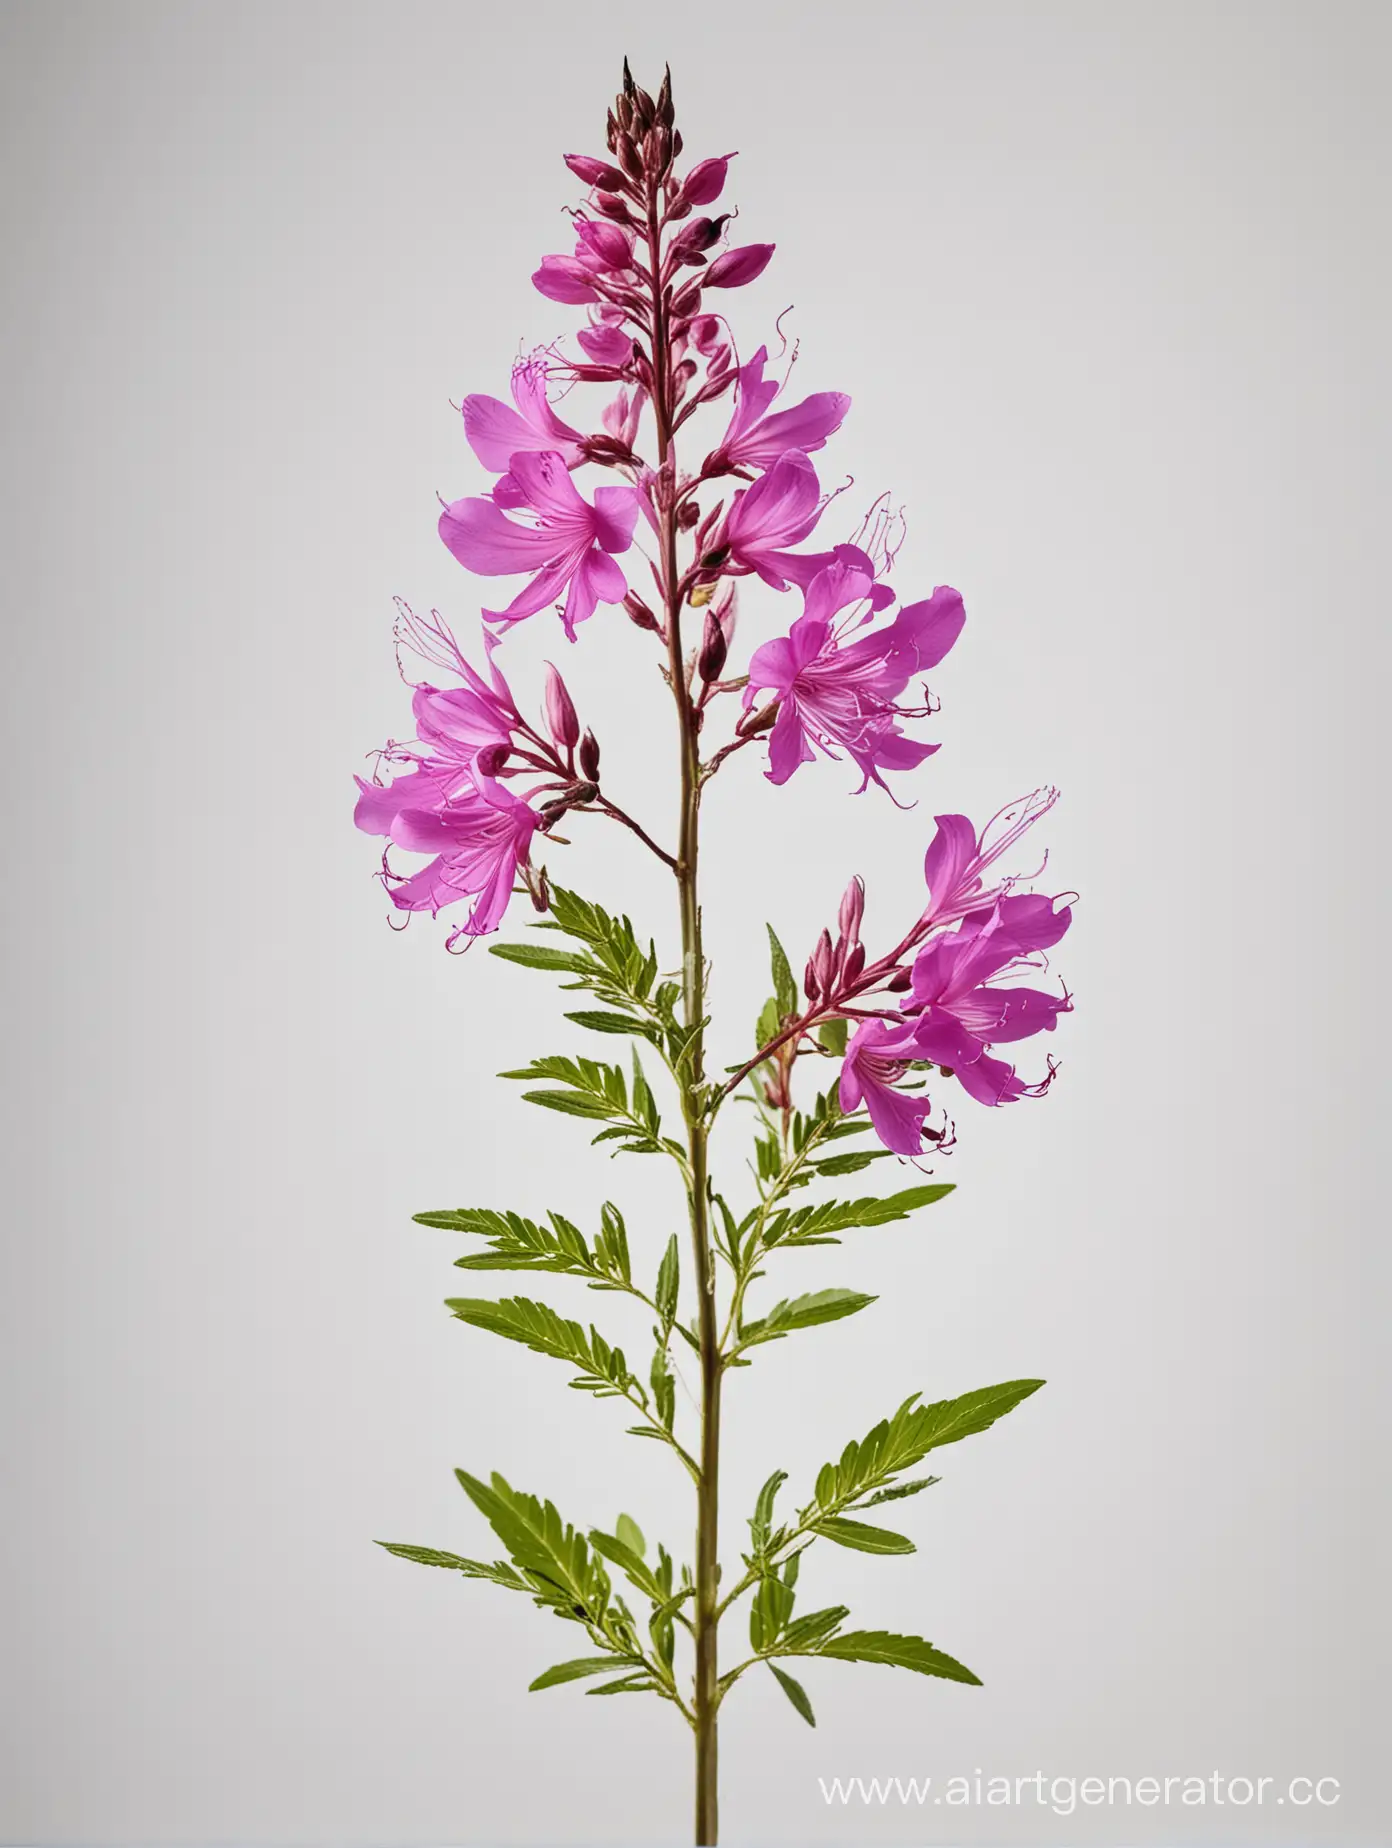 CloseUp-Vibrant-Fireweed-Wildflower-on-White-Background